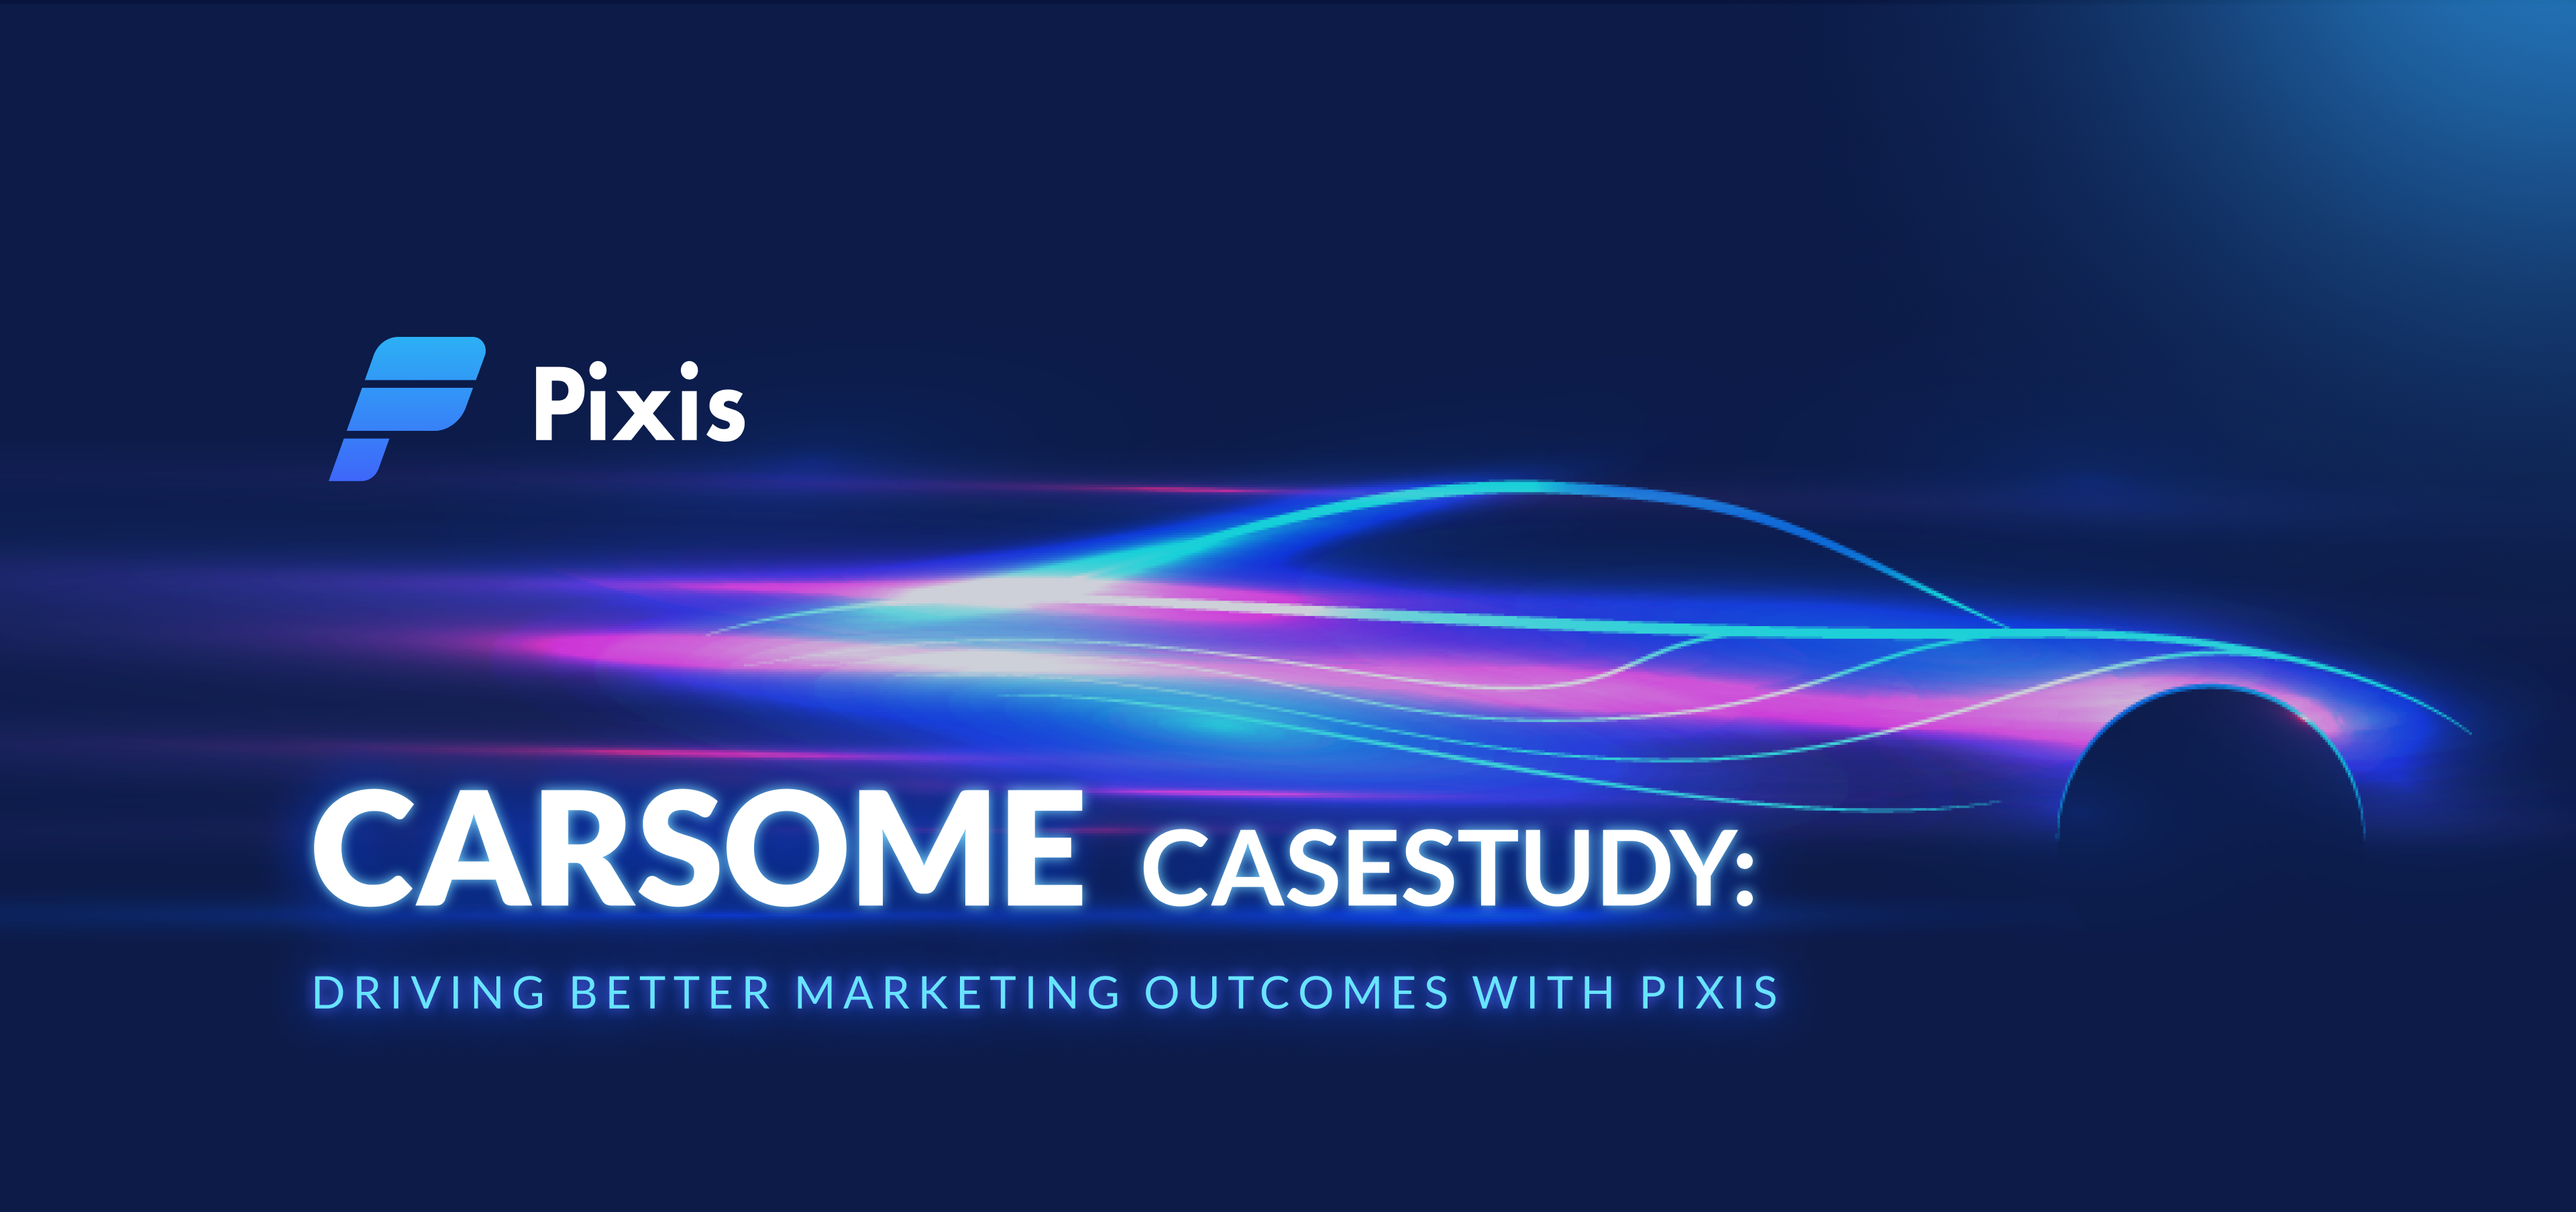 CARSOME deployed Pixis' codeless AI infrastructure and cut their Cost Per Lead (CPL) by 40%.